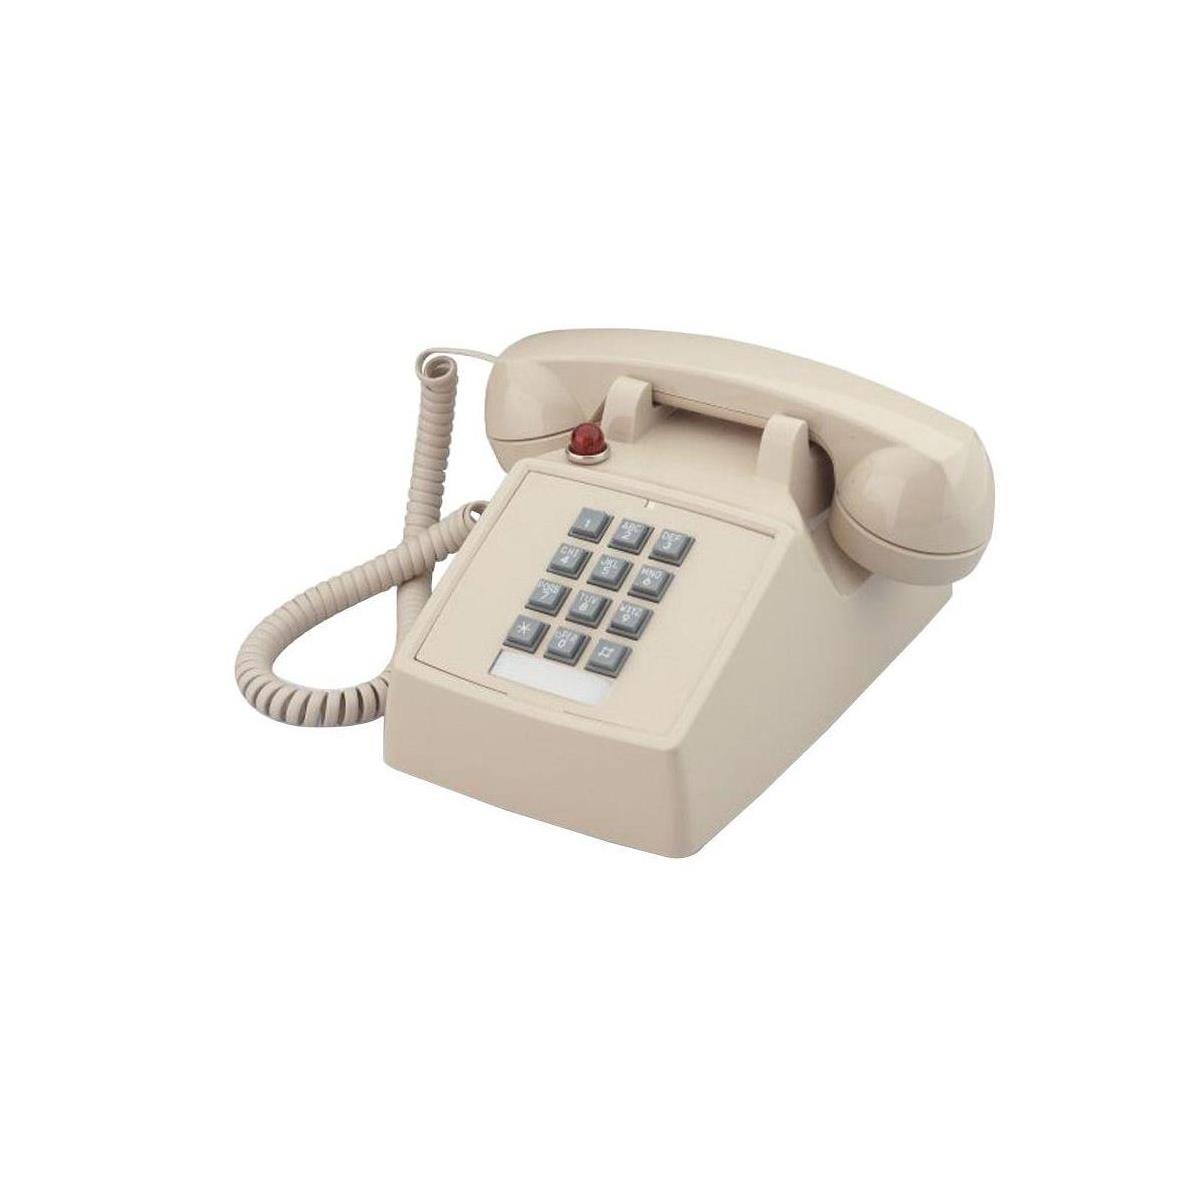 Photos - Corded Phone Came-TV Cortelco 250044VBA57MD Desk Corded Telephone with Message Waiting,